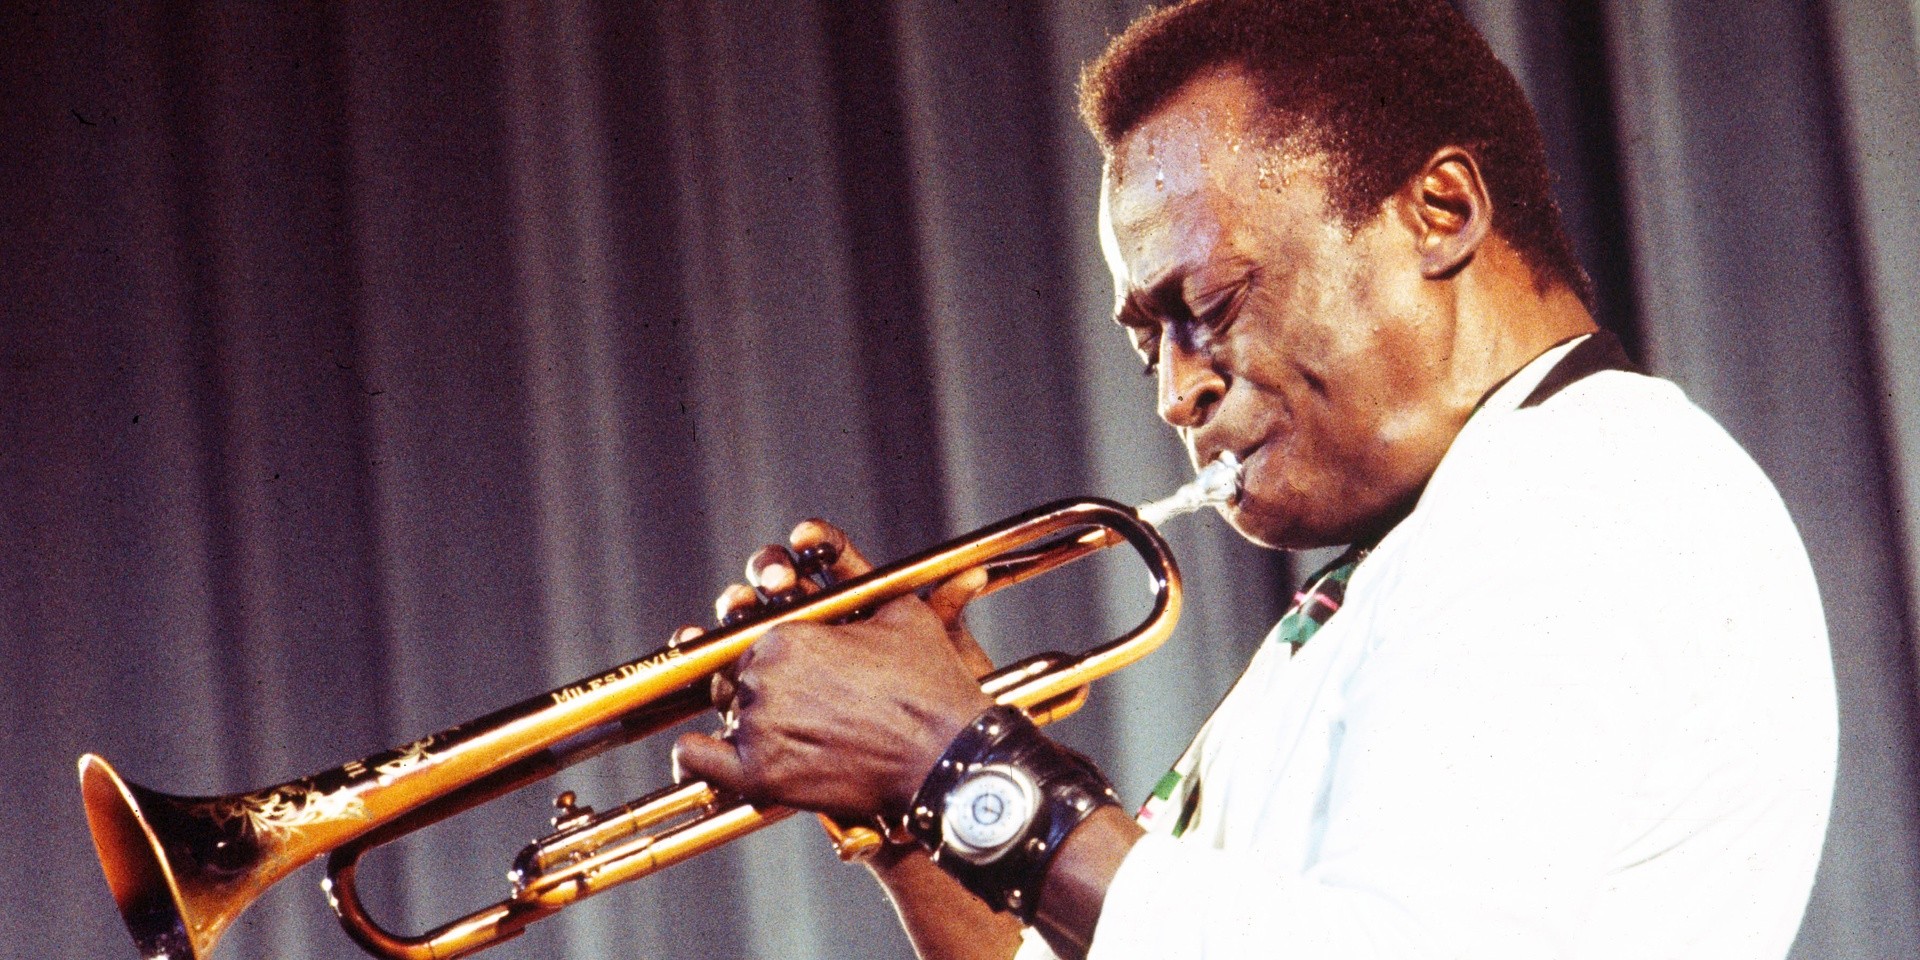 Miles Davis’ unreleased album from 1985, Rubberband, to be released later this year in September